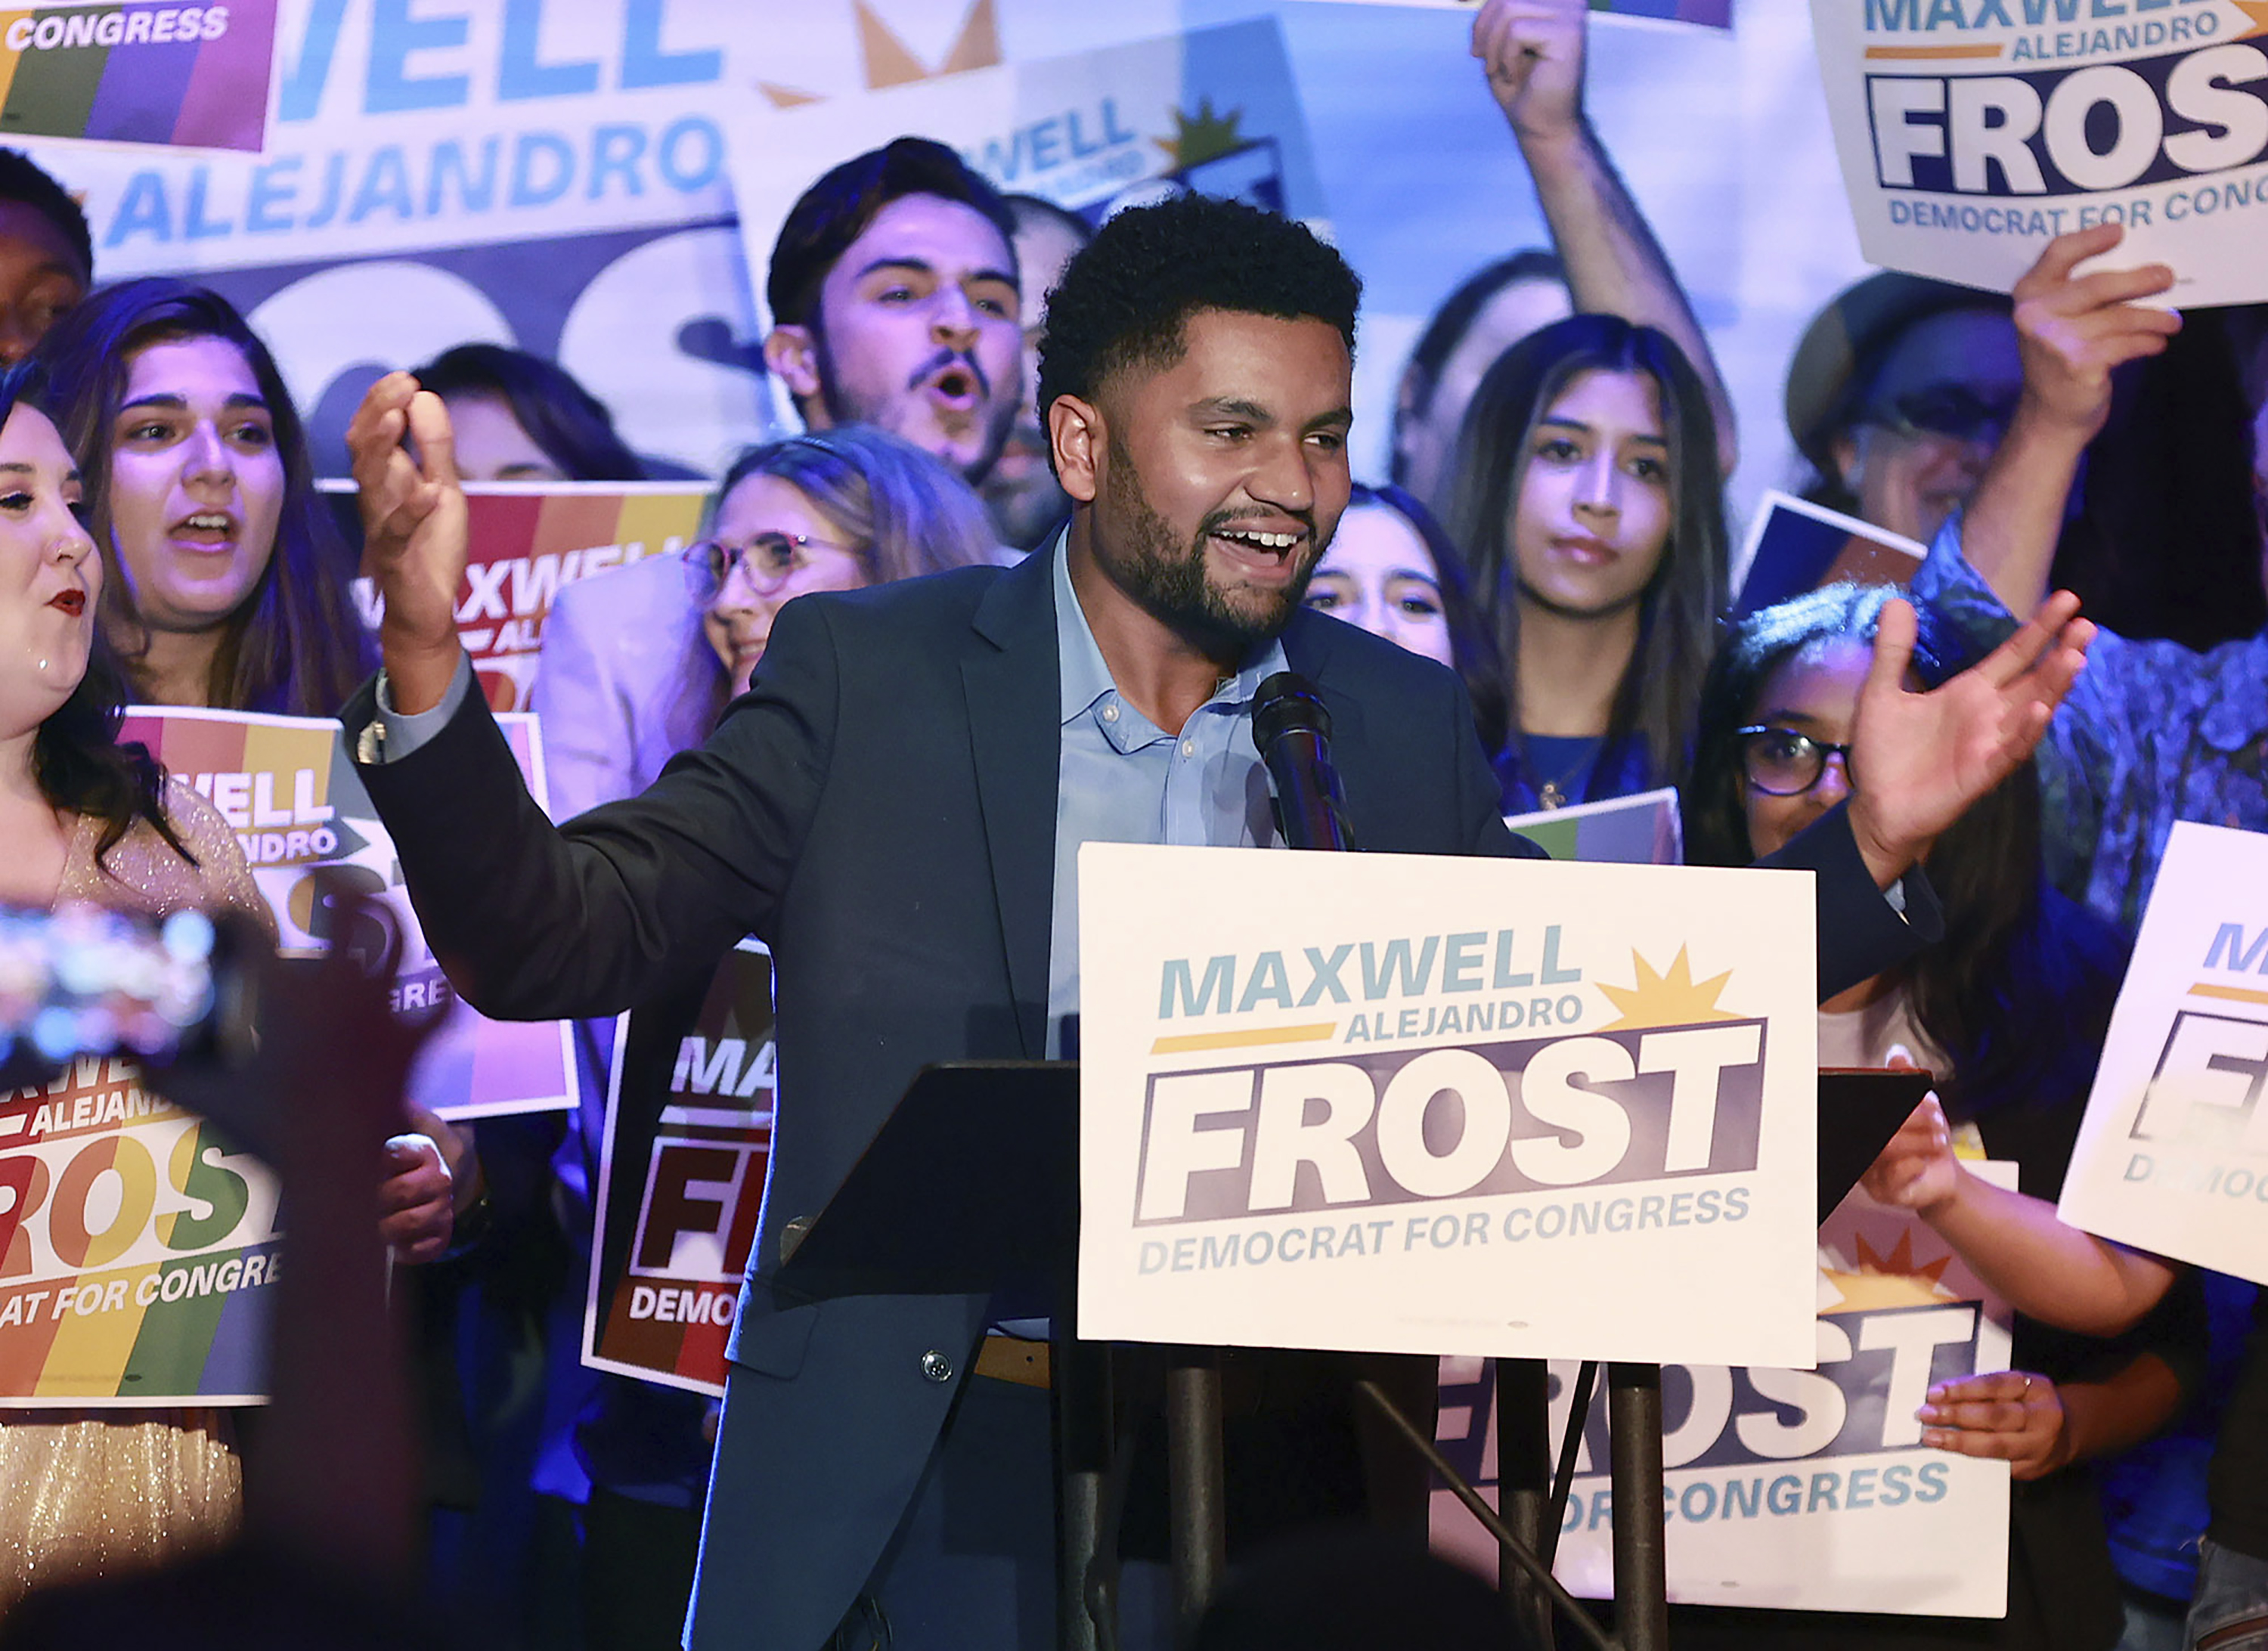 Maxwell Alejandro Frost speaks as he celebrates with supporters during a victory party at The Abbey in Orlando, Florida, on Tuesday, November 8.